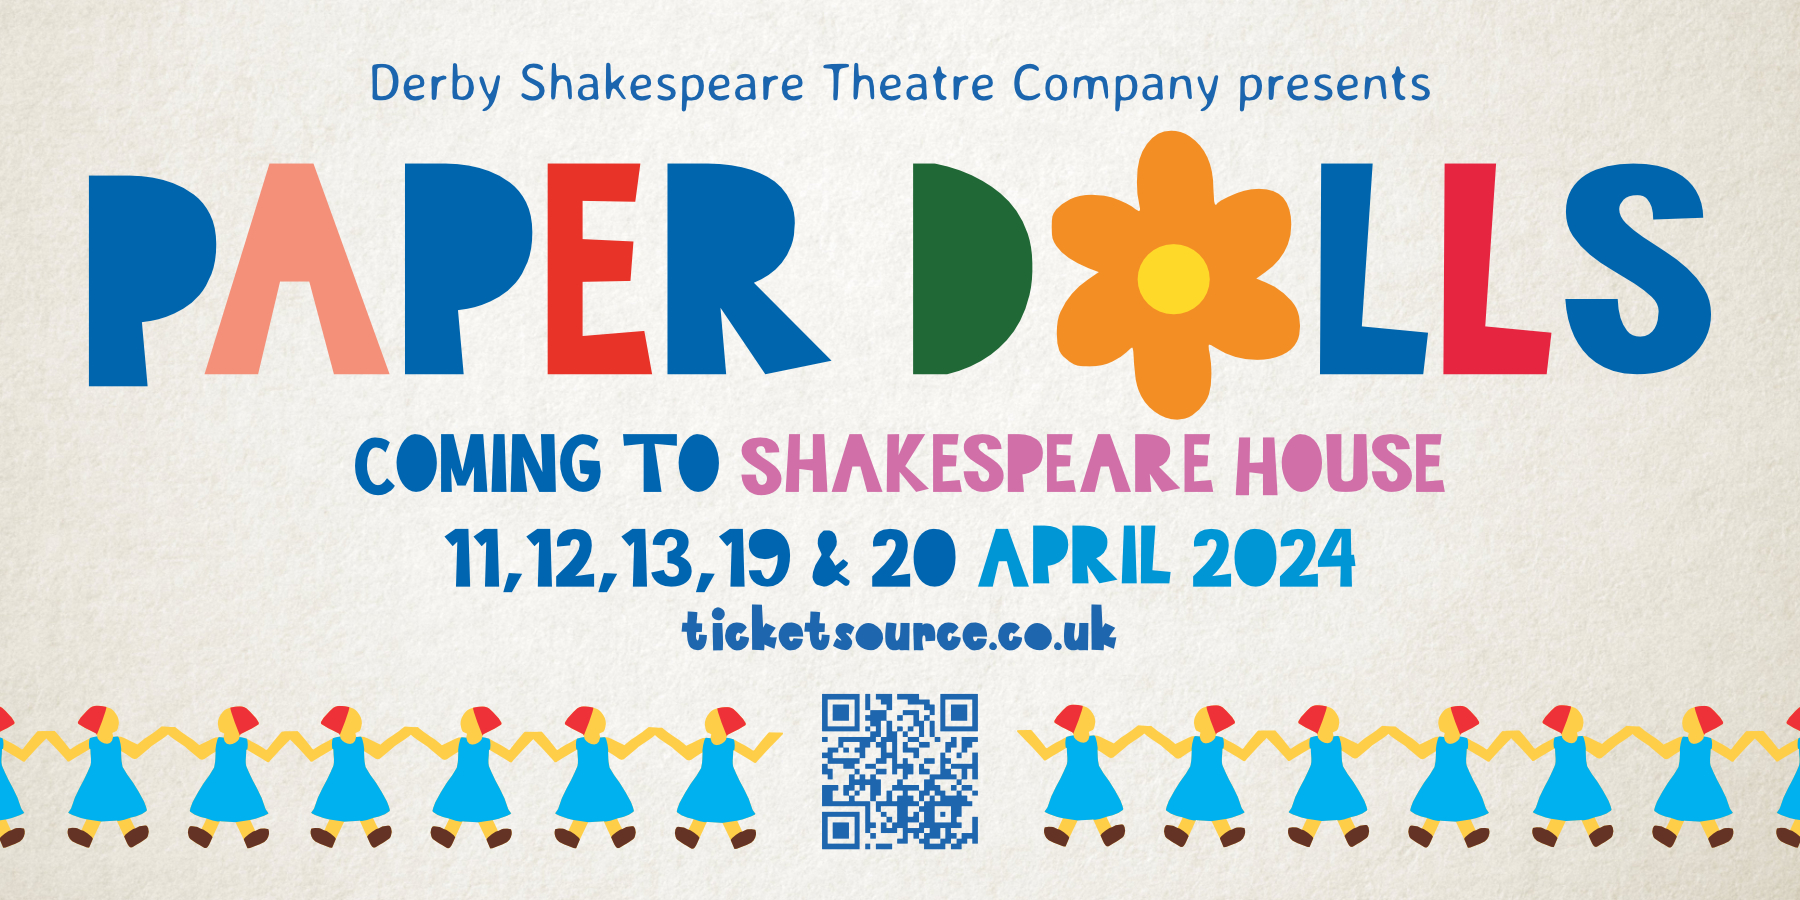 Vinyl street banner for Derby Shakespeare Theatre Company's production of 'Paper Dolls'